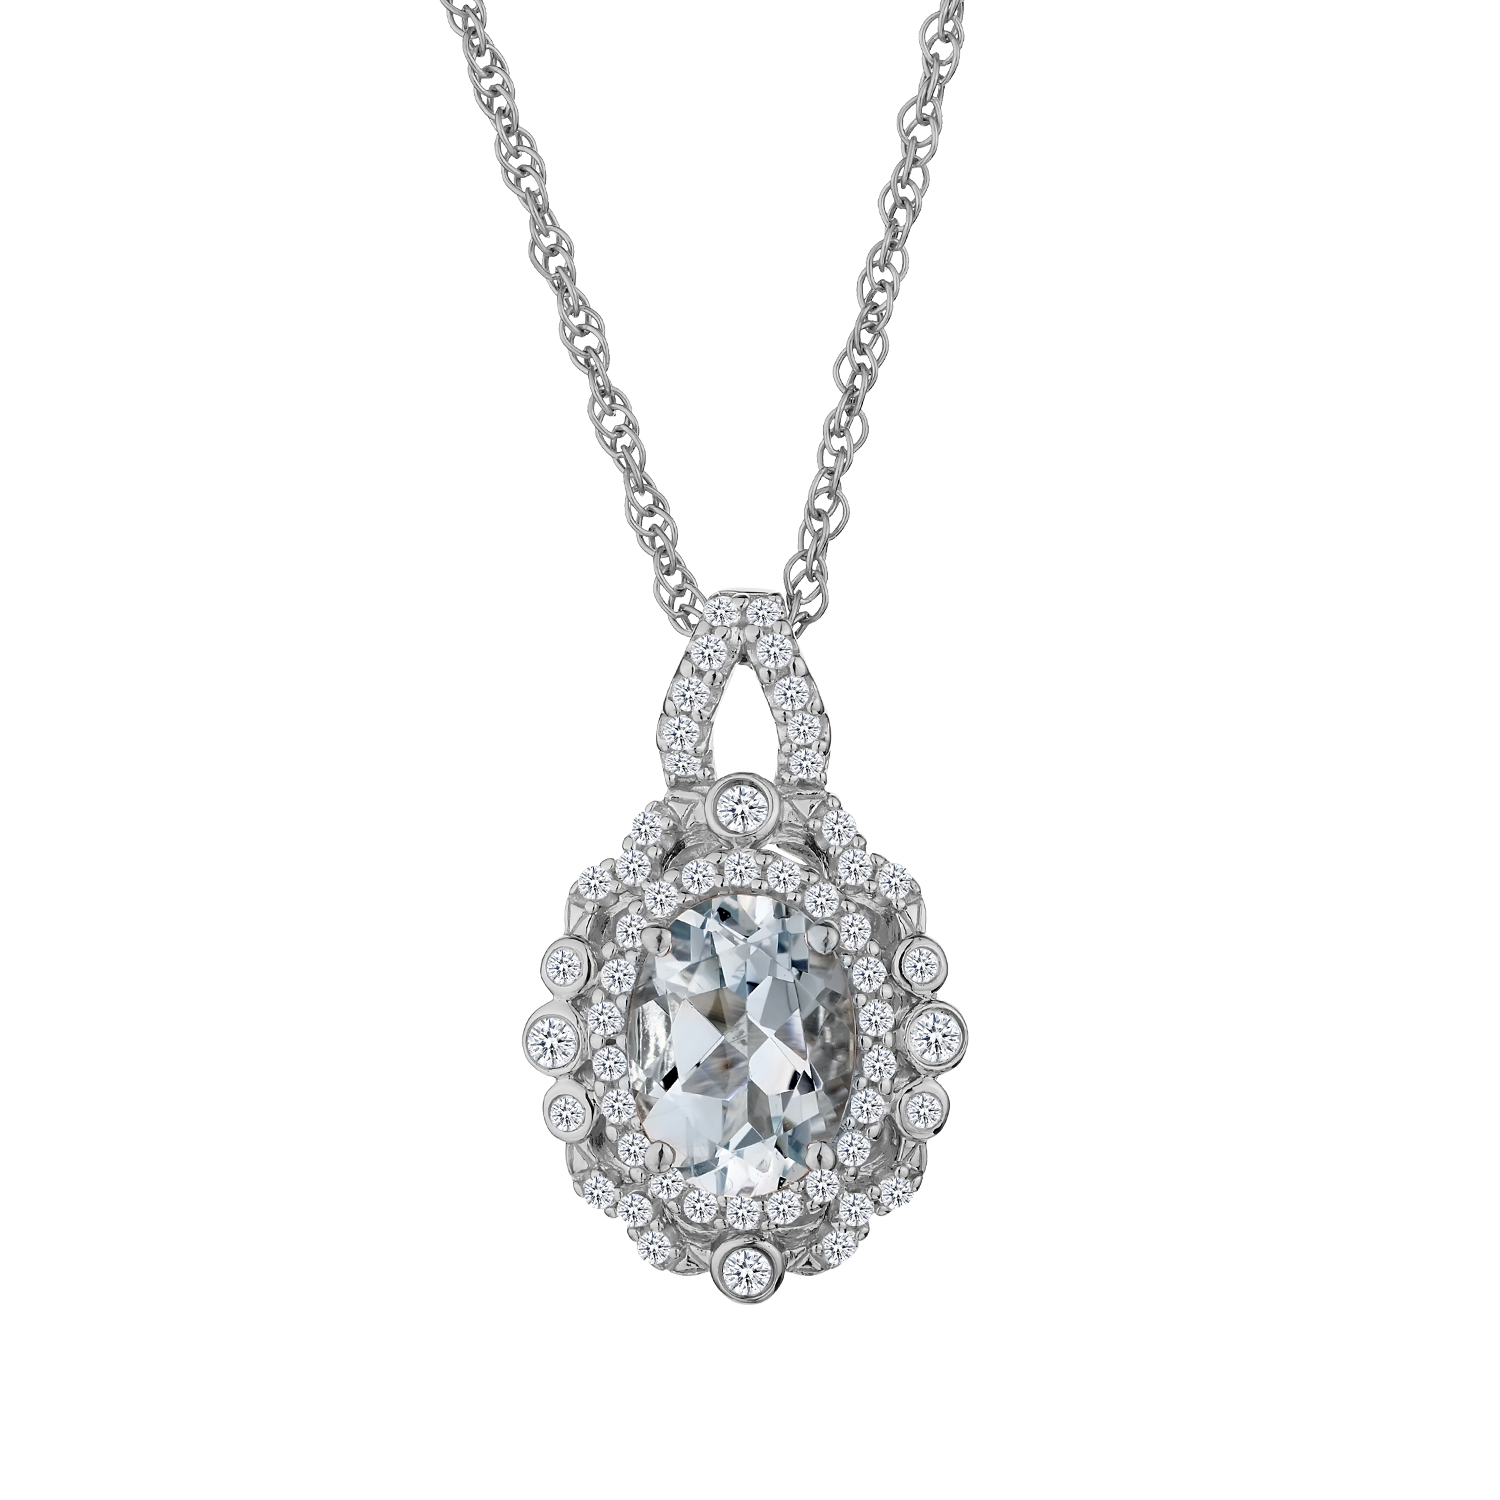 Genuine Aquamarine with White Sapphire Pendant,  Sterling Silver. Necklaces and Pendants. Griffin Jewellery Designs. 